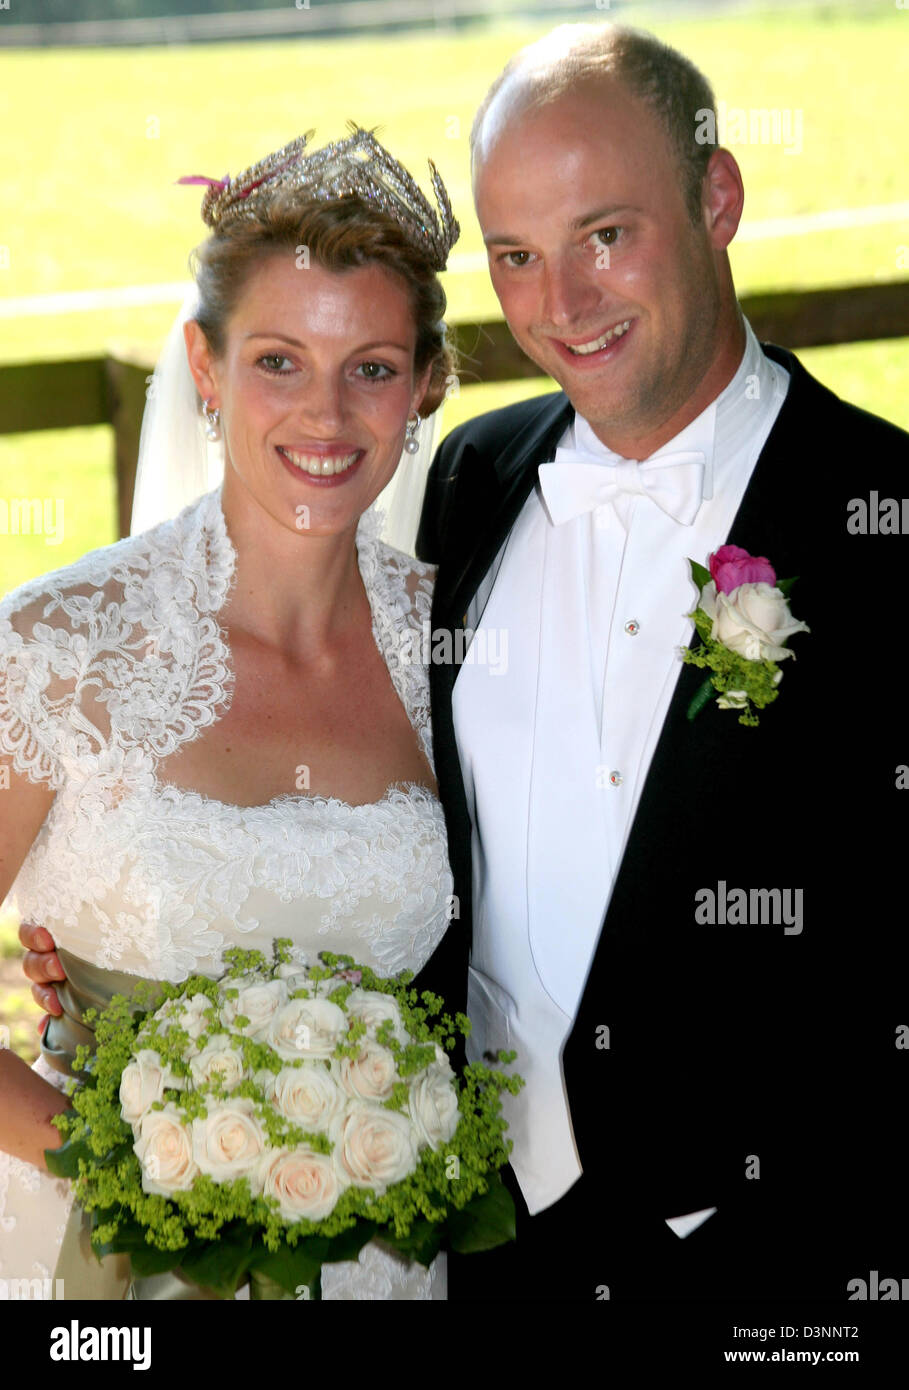 prince-philipp-of-hesse-and-his-bride-laetitia-bechtolf-smile-after-D3NNT2.jpg